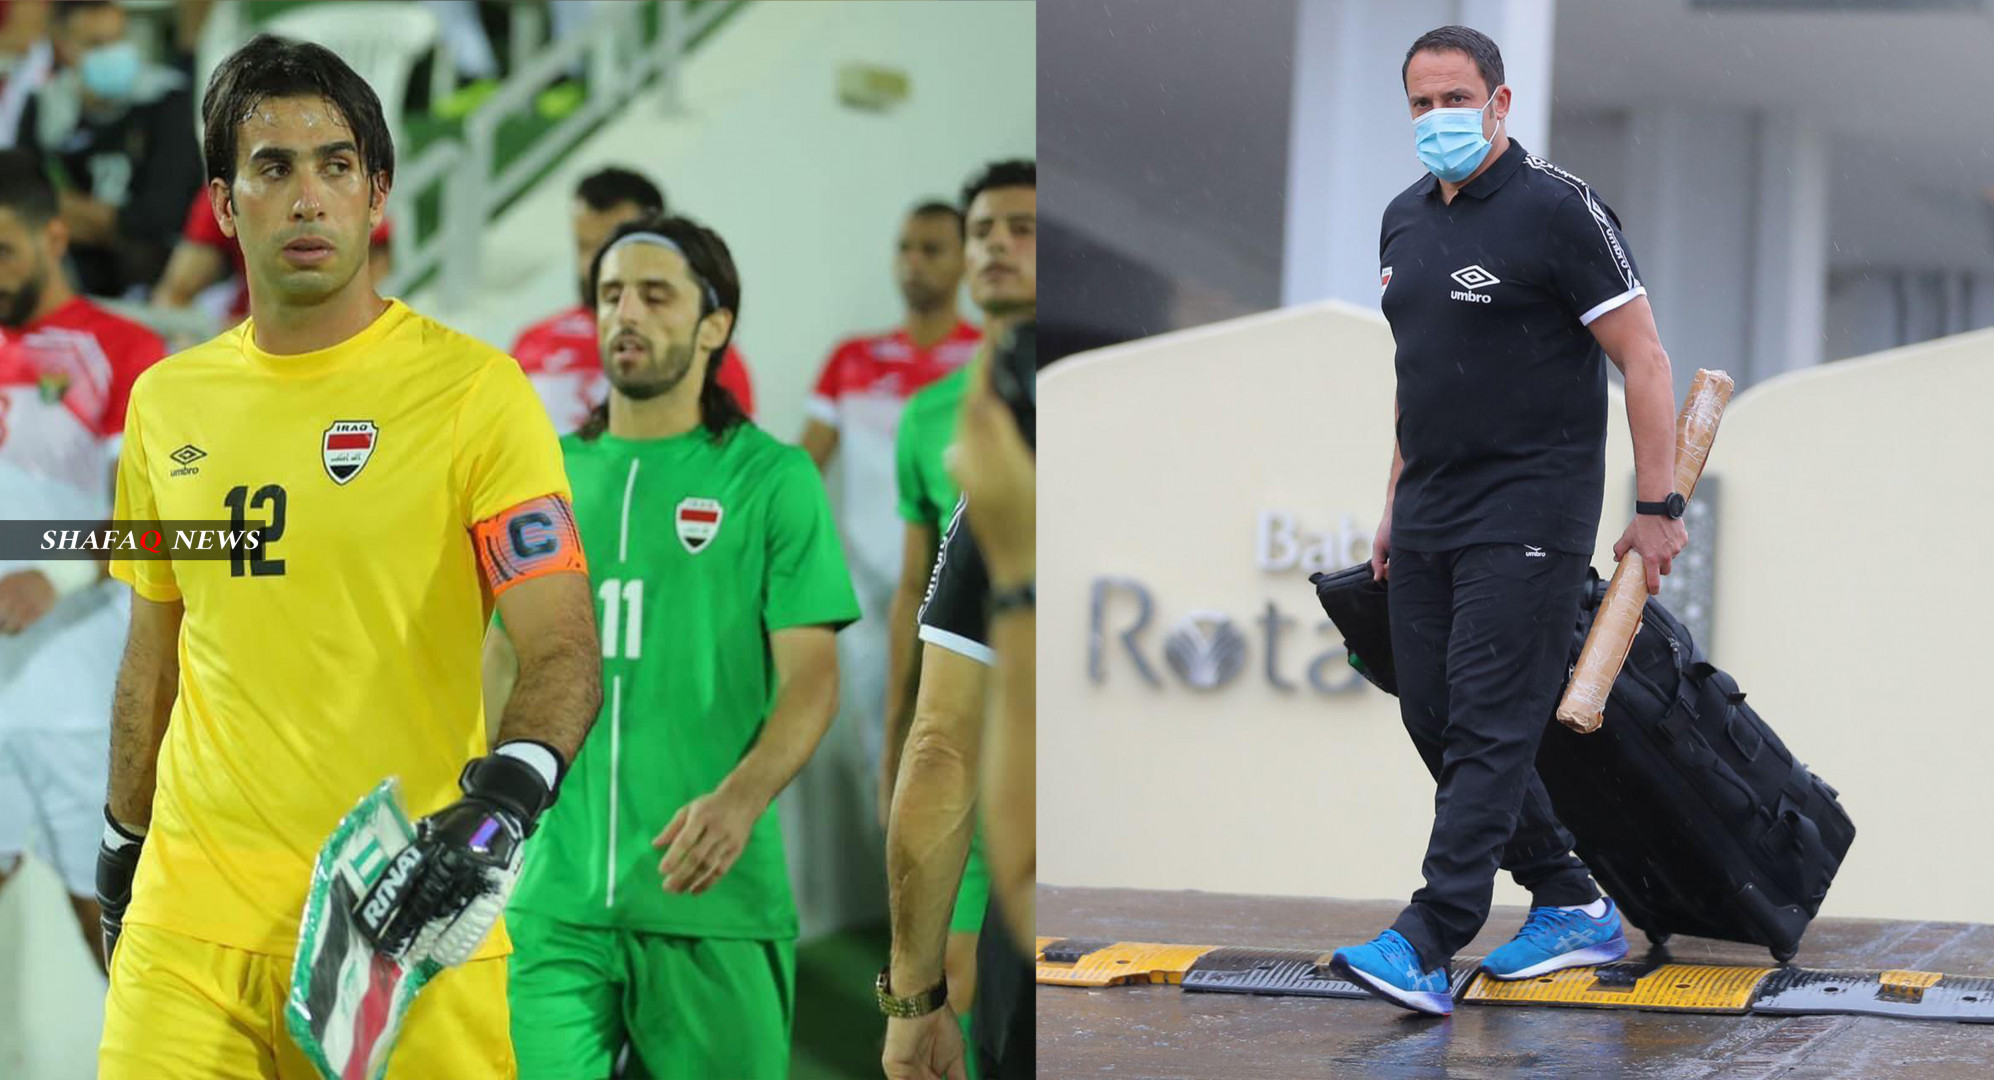 Two members from the Iraqi national team tested positive for COVID-19